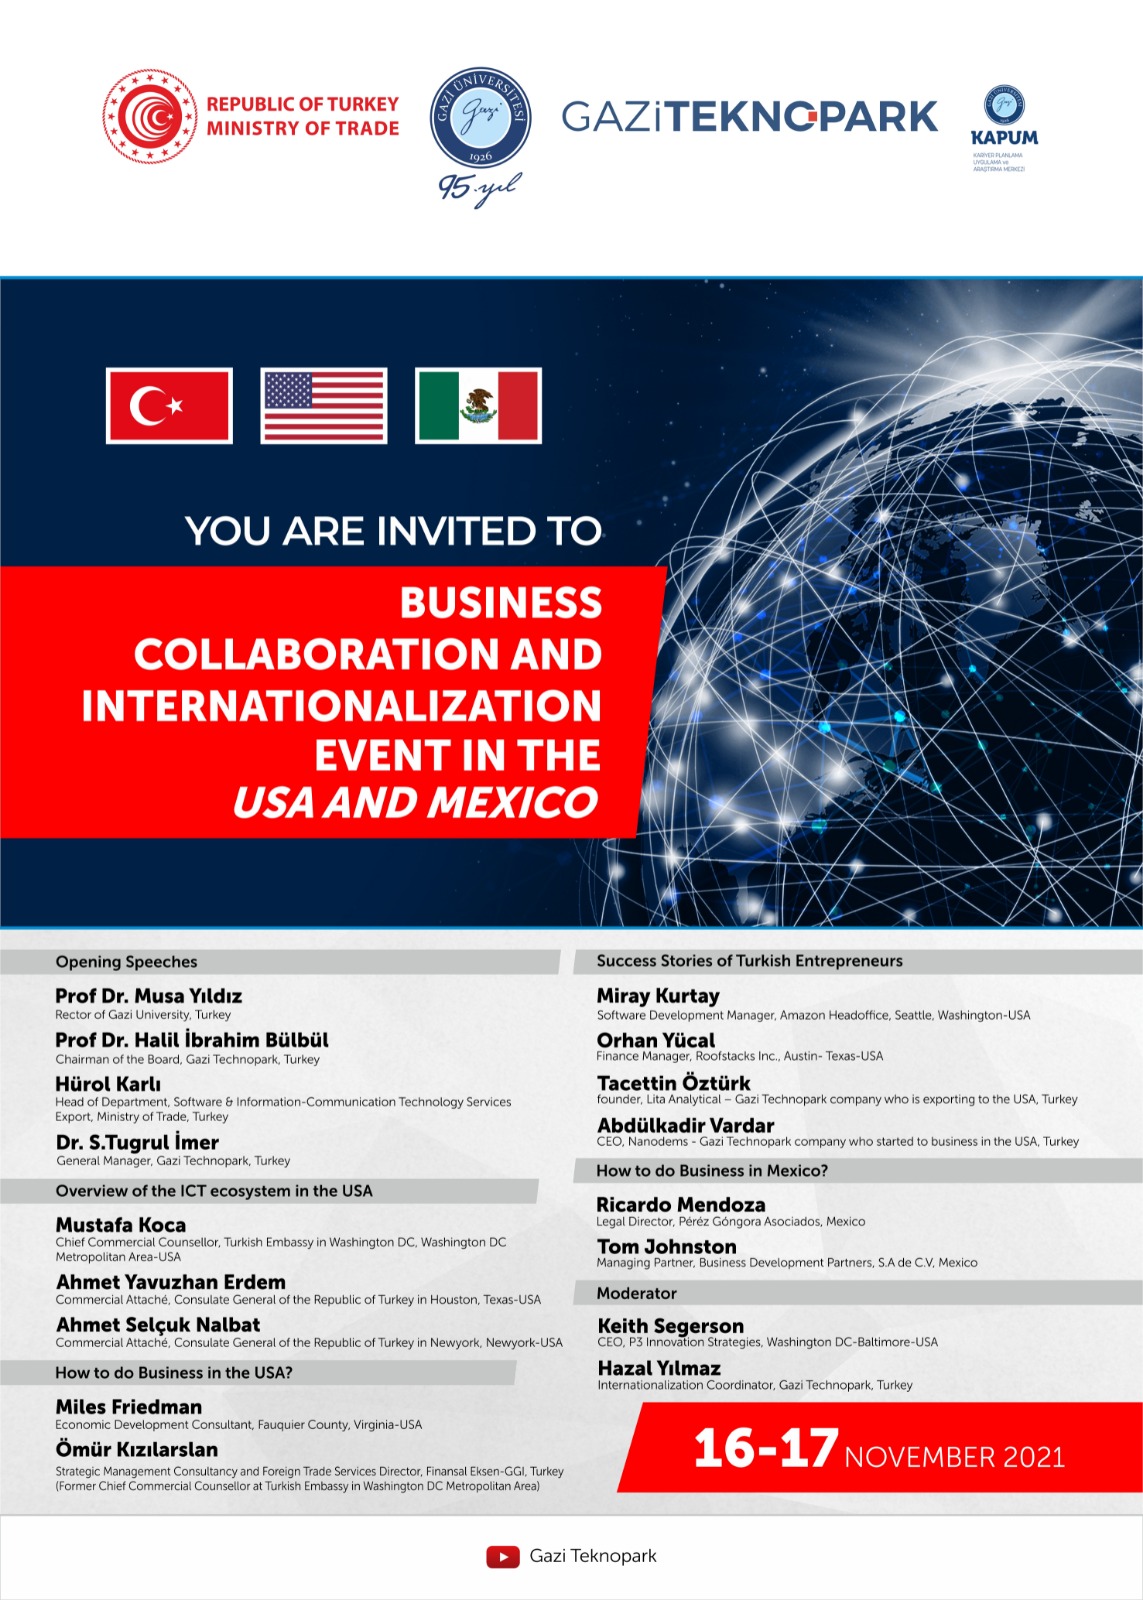 You Are Invited to Business Collaboration and Internationalization Event in the USA and Mexico